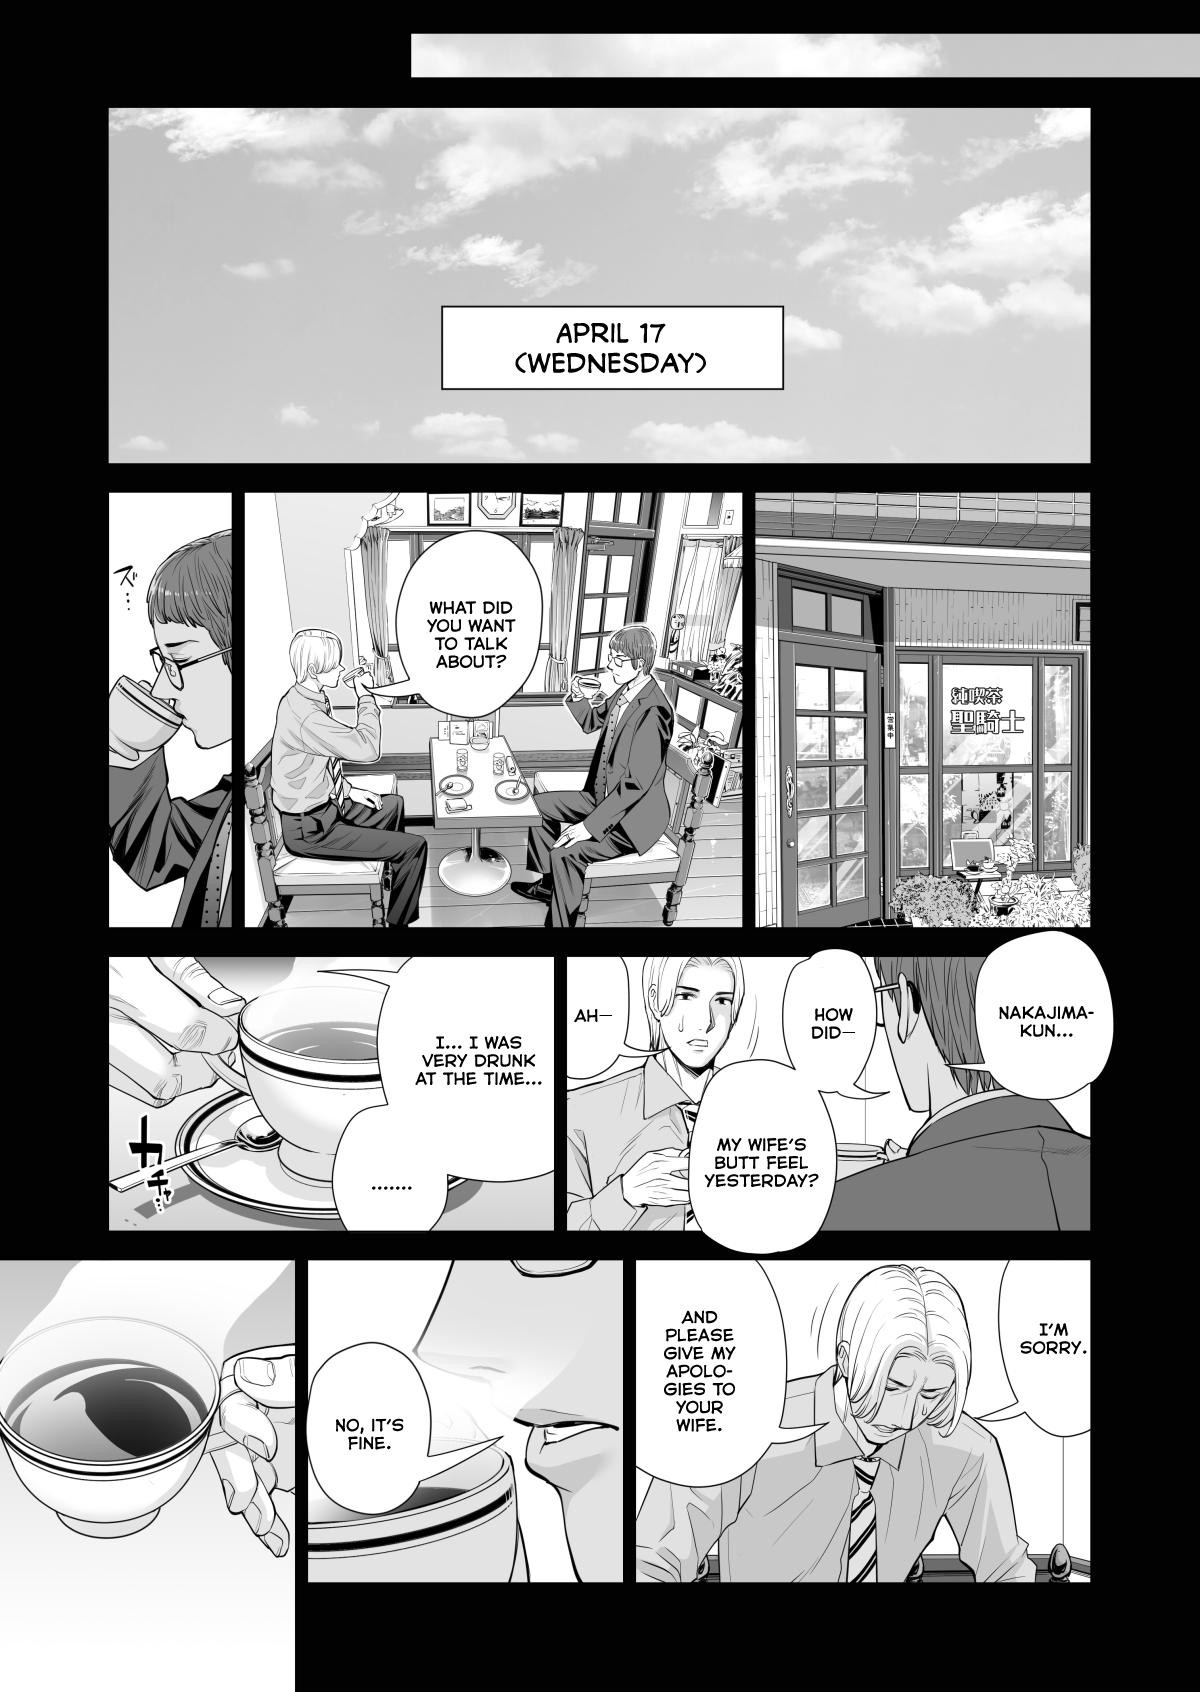 [HGT Lab (Tsusauto)] Tsukiyo no Midare Zake (Kouhen) Moonlit Intoxication ~ A Housewife Stolen by a Coworker Besides her Blackout Drunk Husband ~ Chapter 2 [English] 44